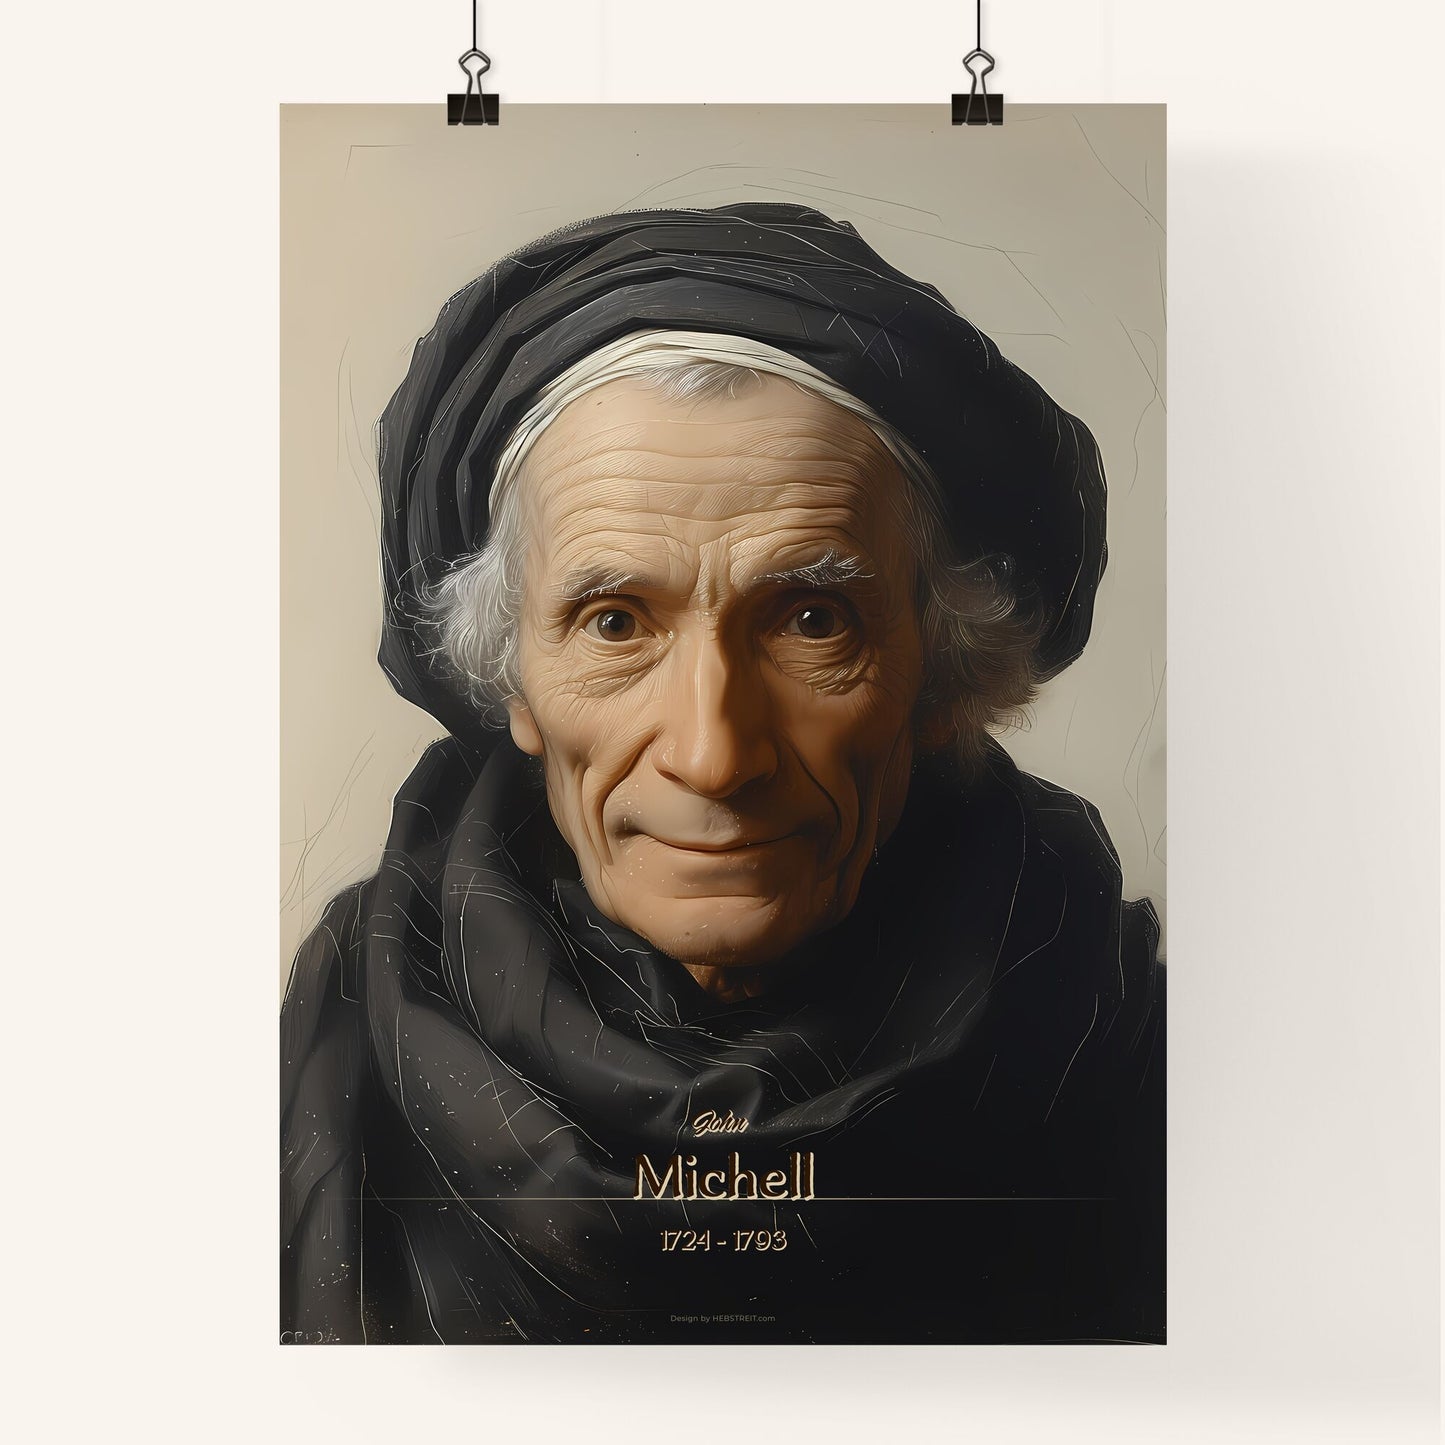 John, Michell, 1724 - 1793, A Poster of a man wearing a black scarf and a black headdress Default Title